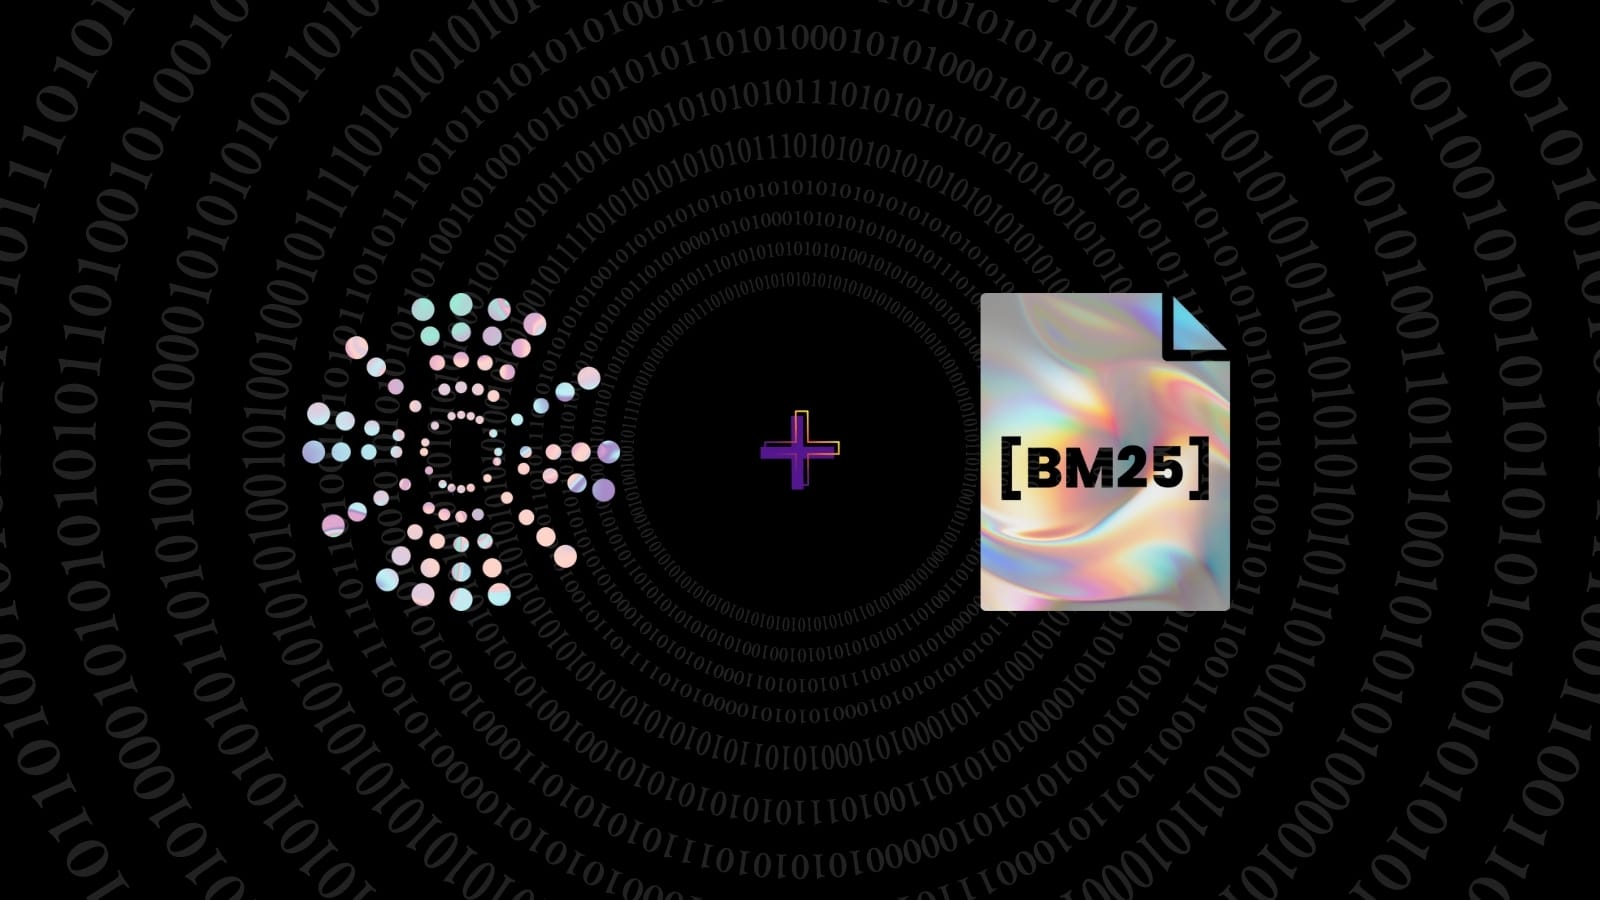 Black background embellished with binary code, featuring a central tech-inspired emblem with multicolored dots, BM25 tag, con